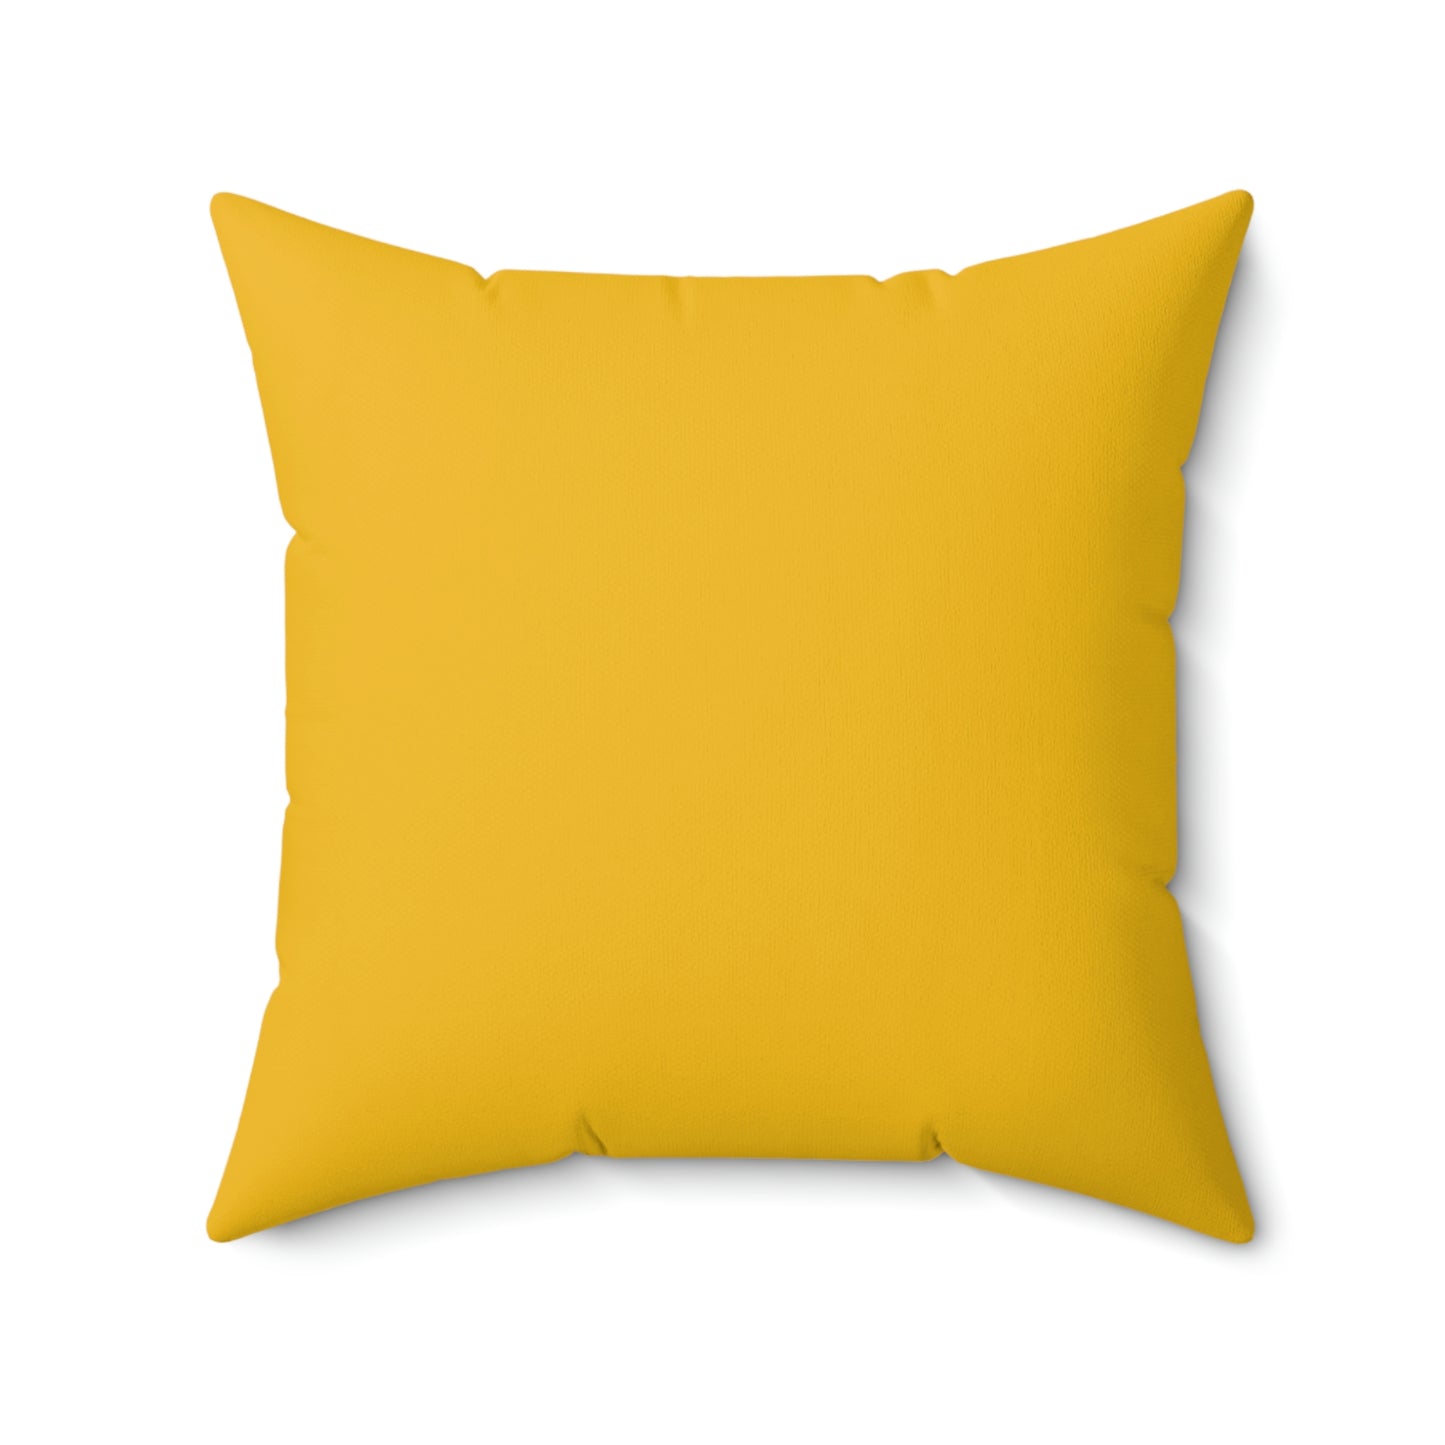 Spun Polyester Square Pillow Case "Mom Wow on Yellow”